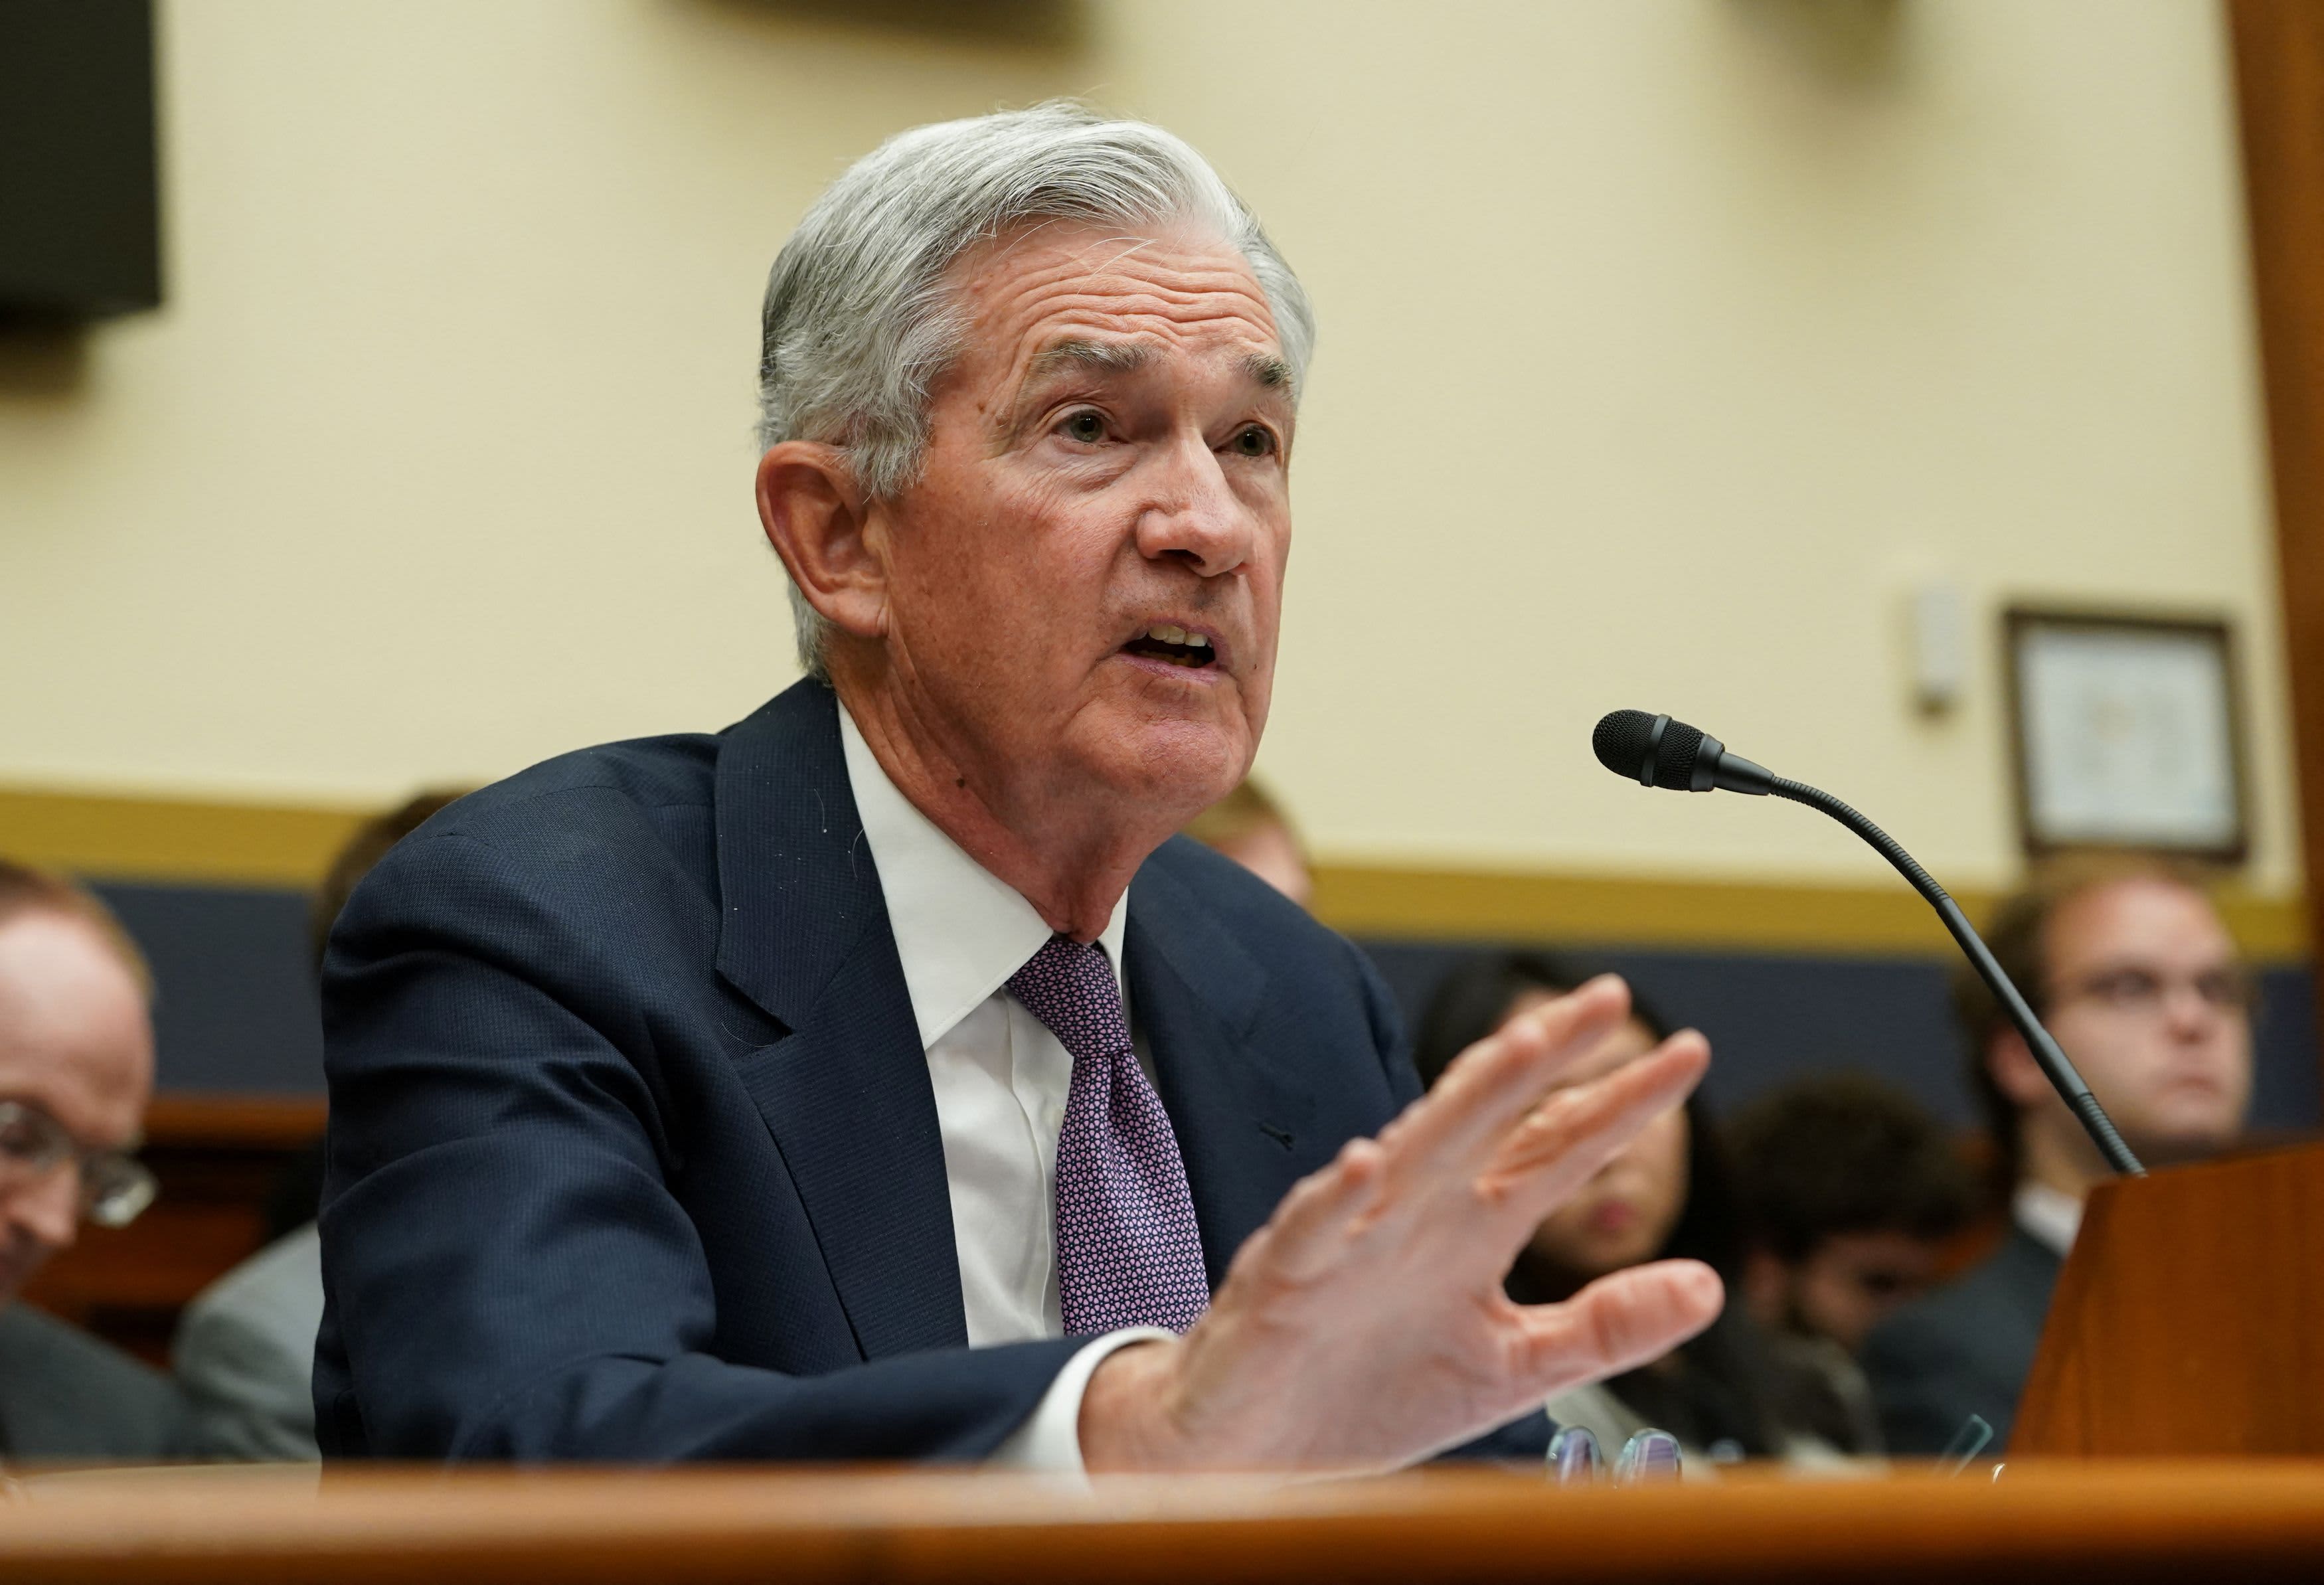 Powell changed everything this week when it comes to the market’s view of interest rates